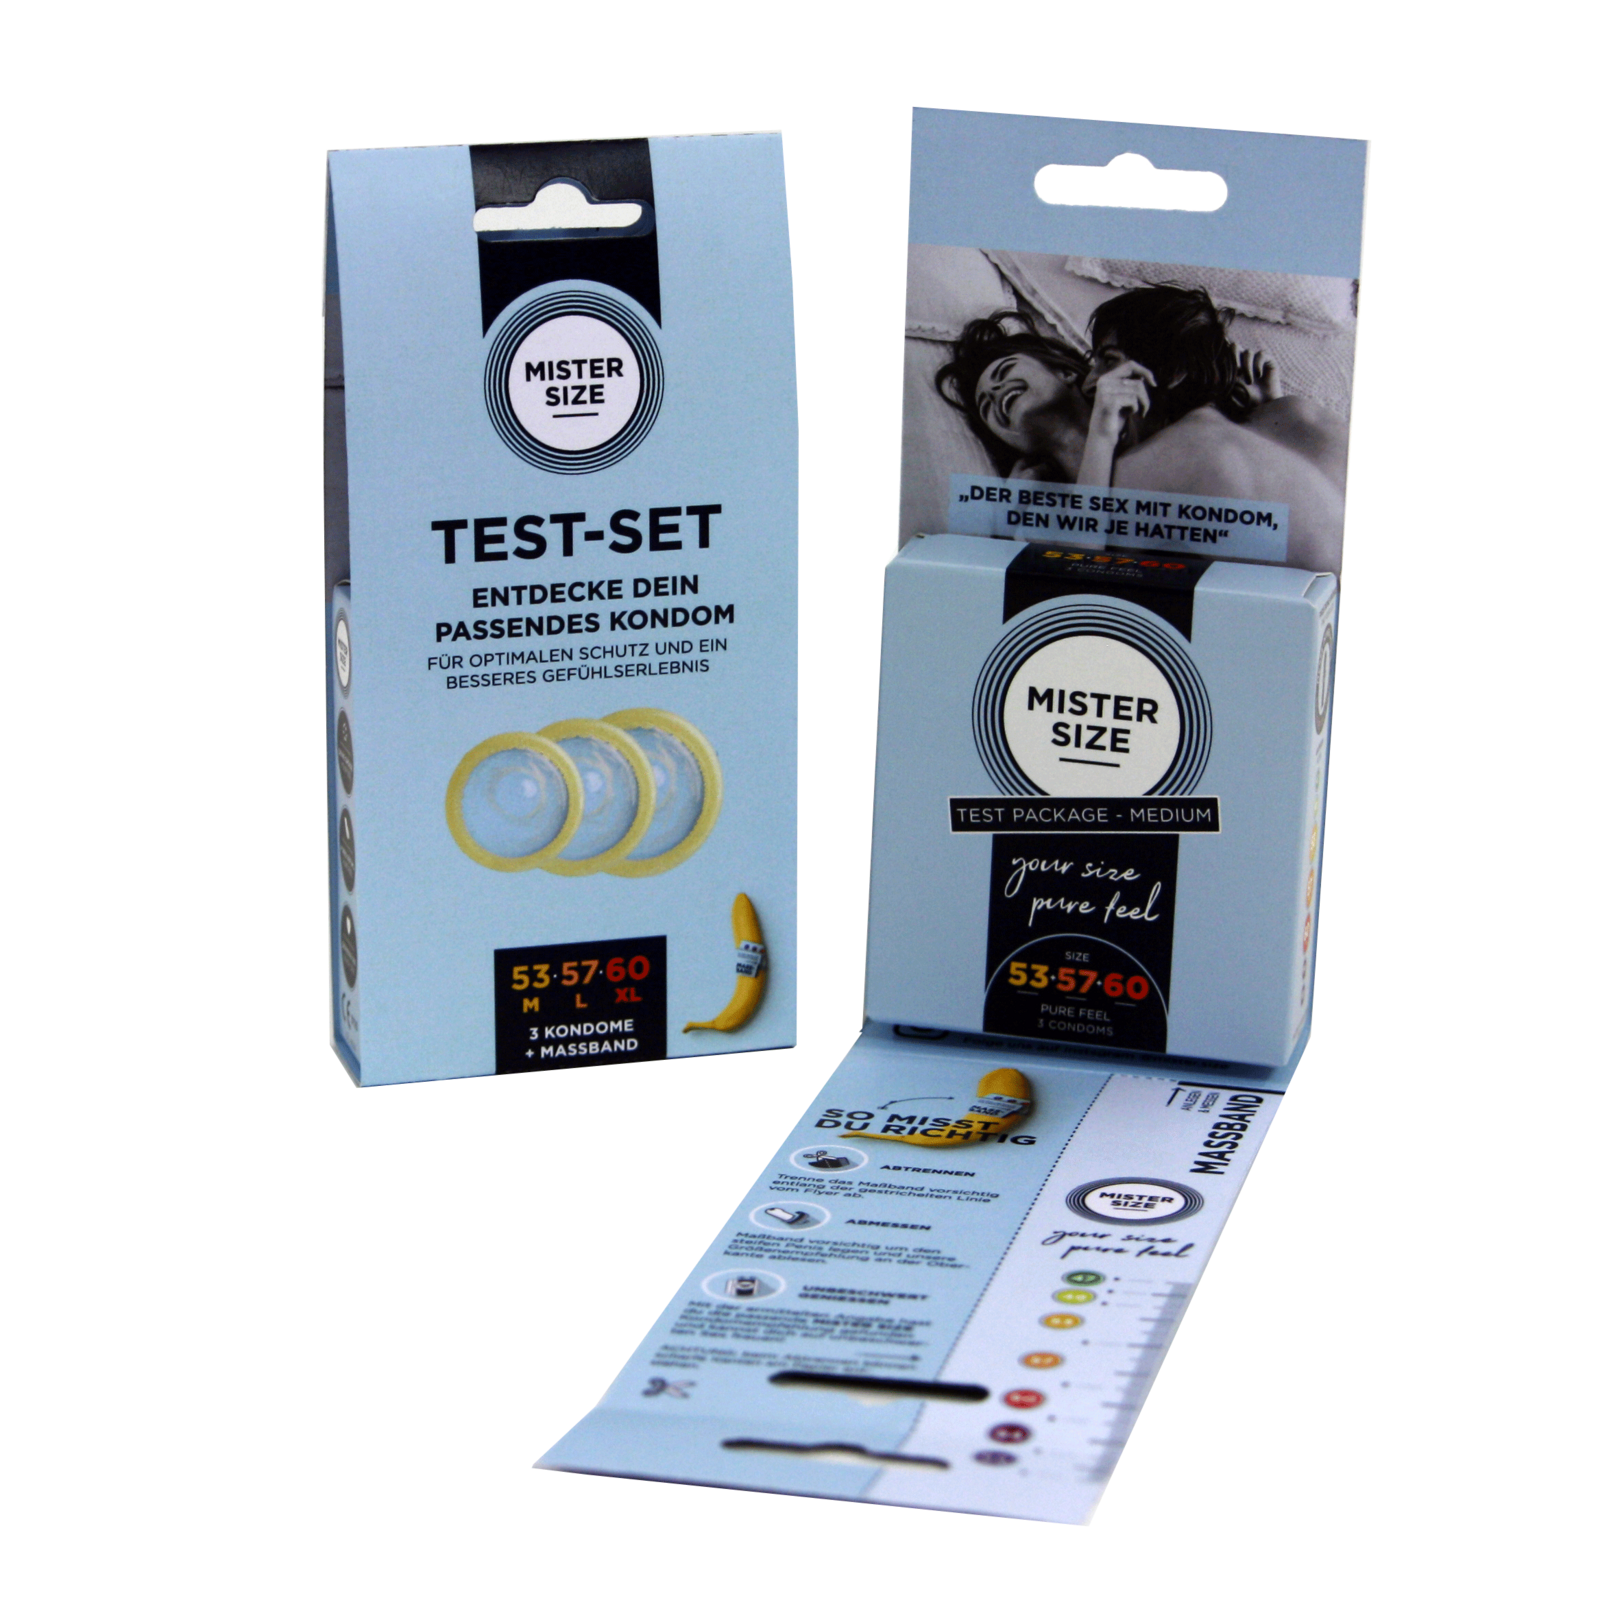 MISTER SIZE test set with integrated measuring tape